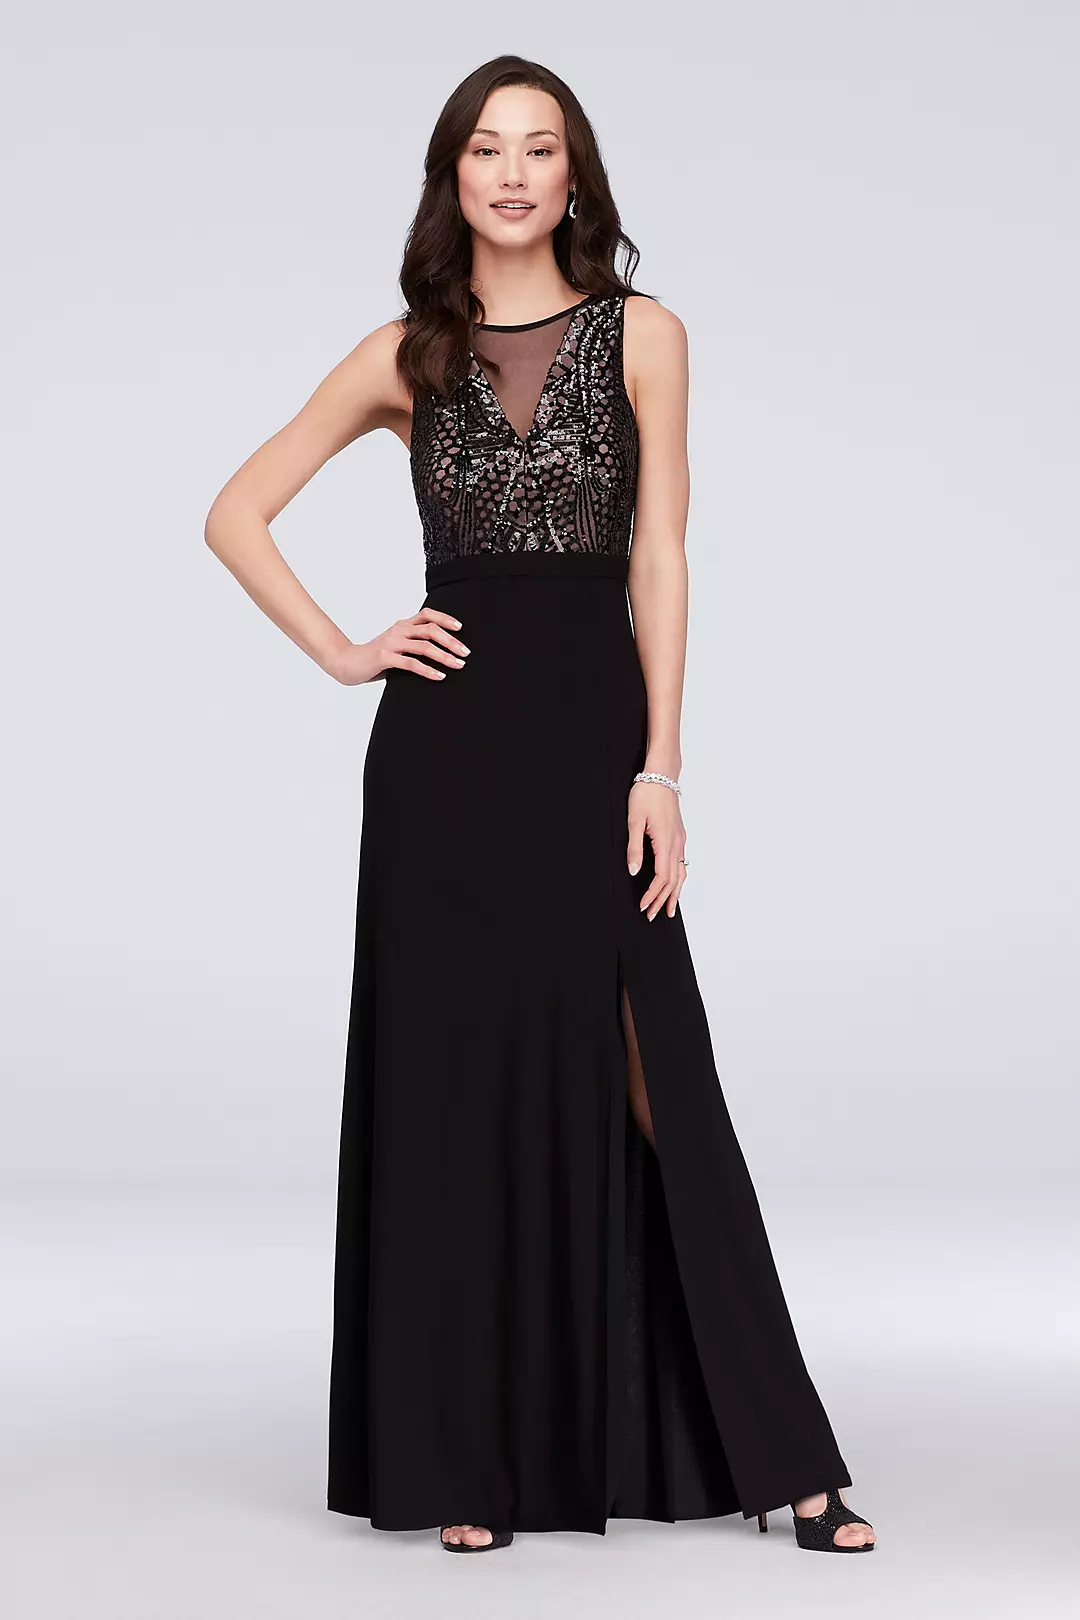  V-Neckline with Sequin Bodice Sheath Gown Image